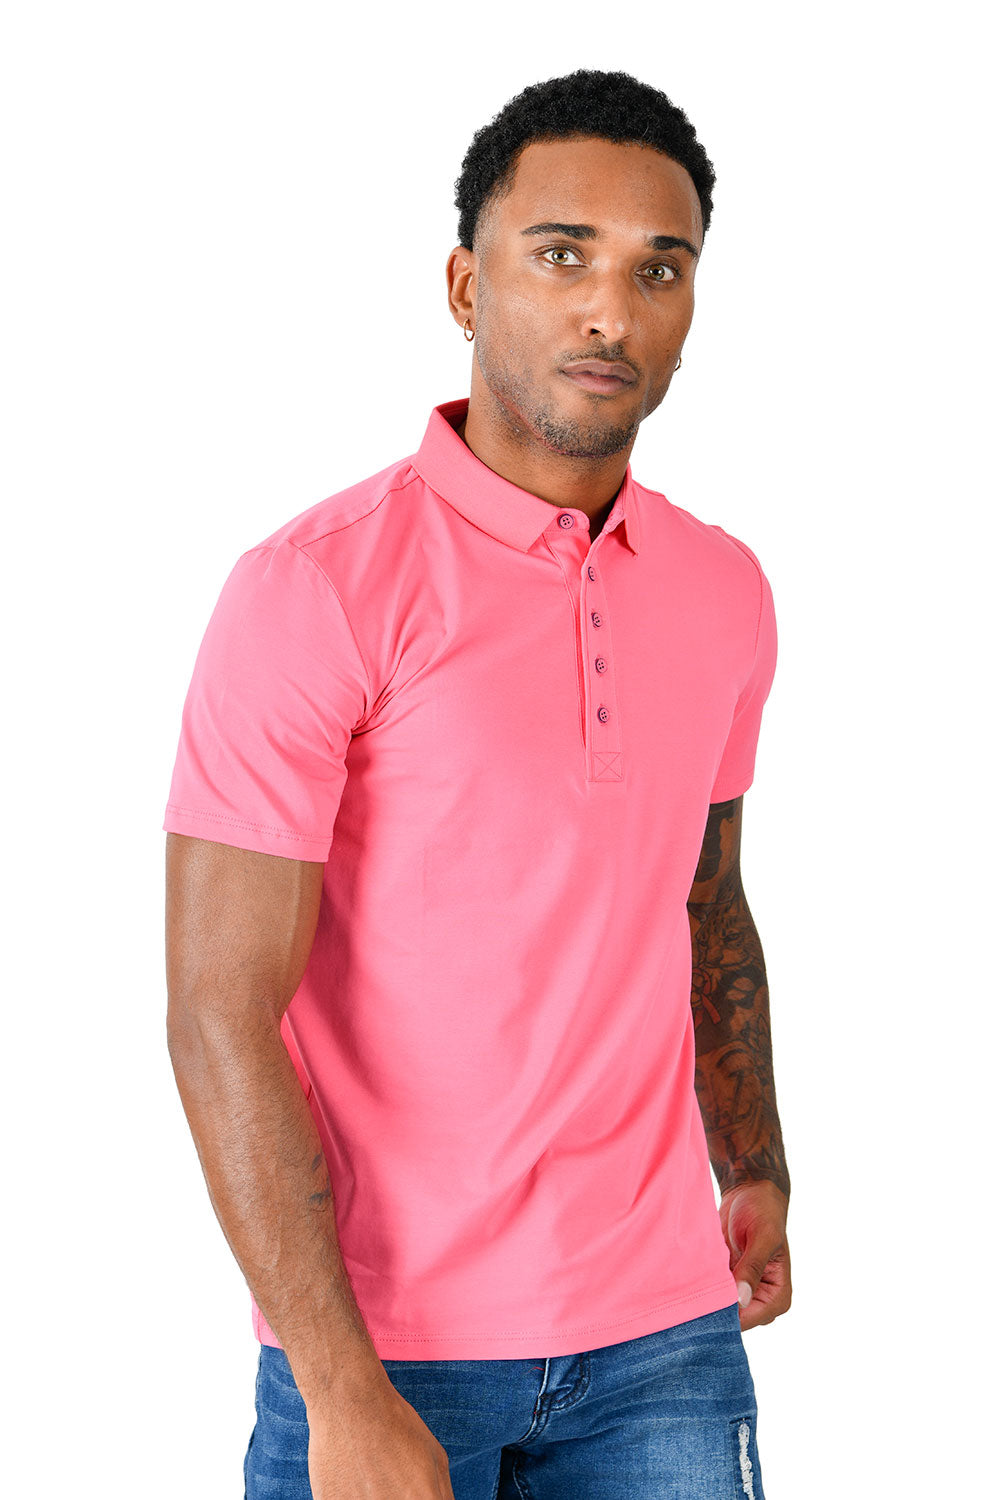 Barabas Men's Solid Color Print Graphic Tee Polo Shirts PP818 Fuchsia